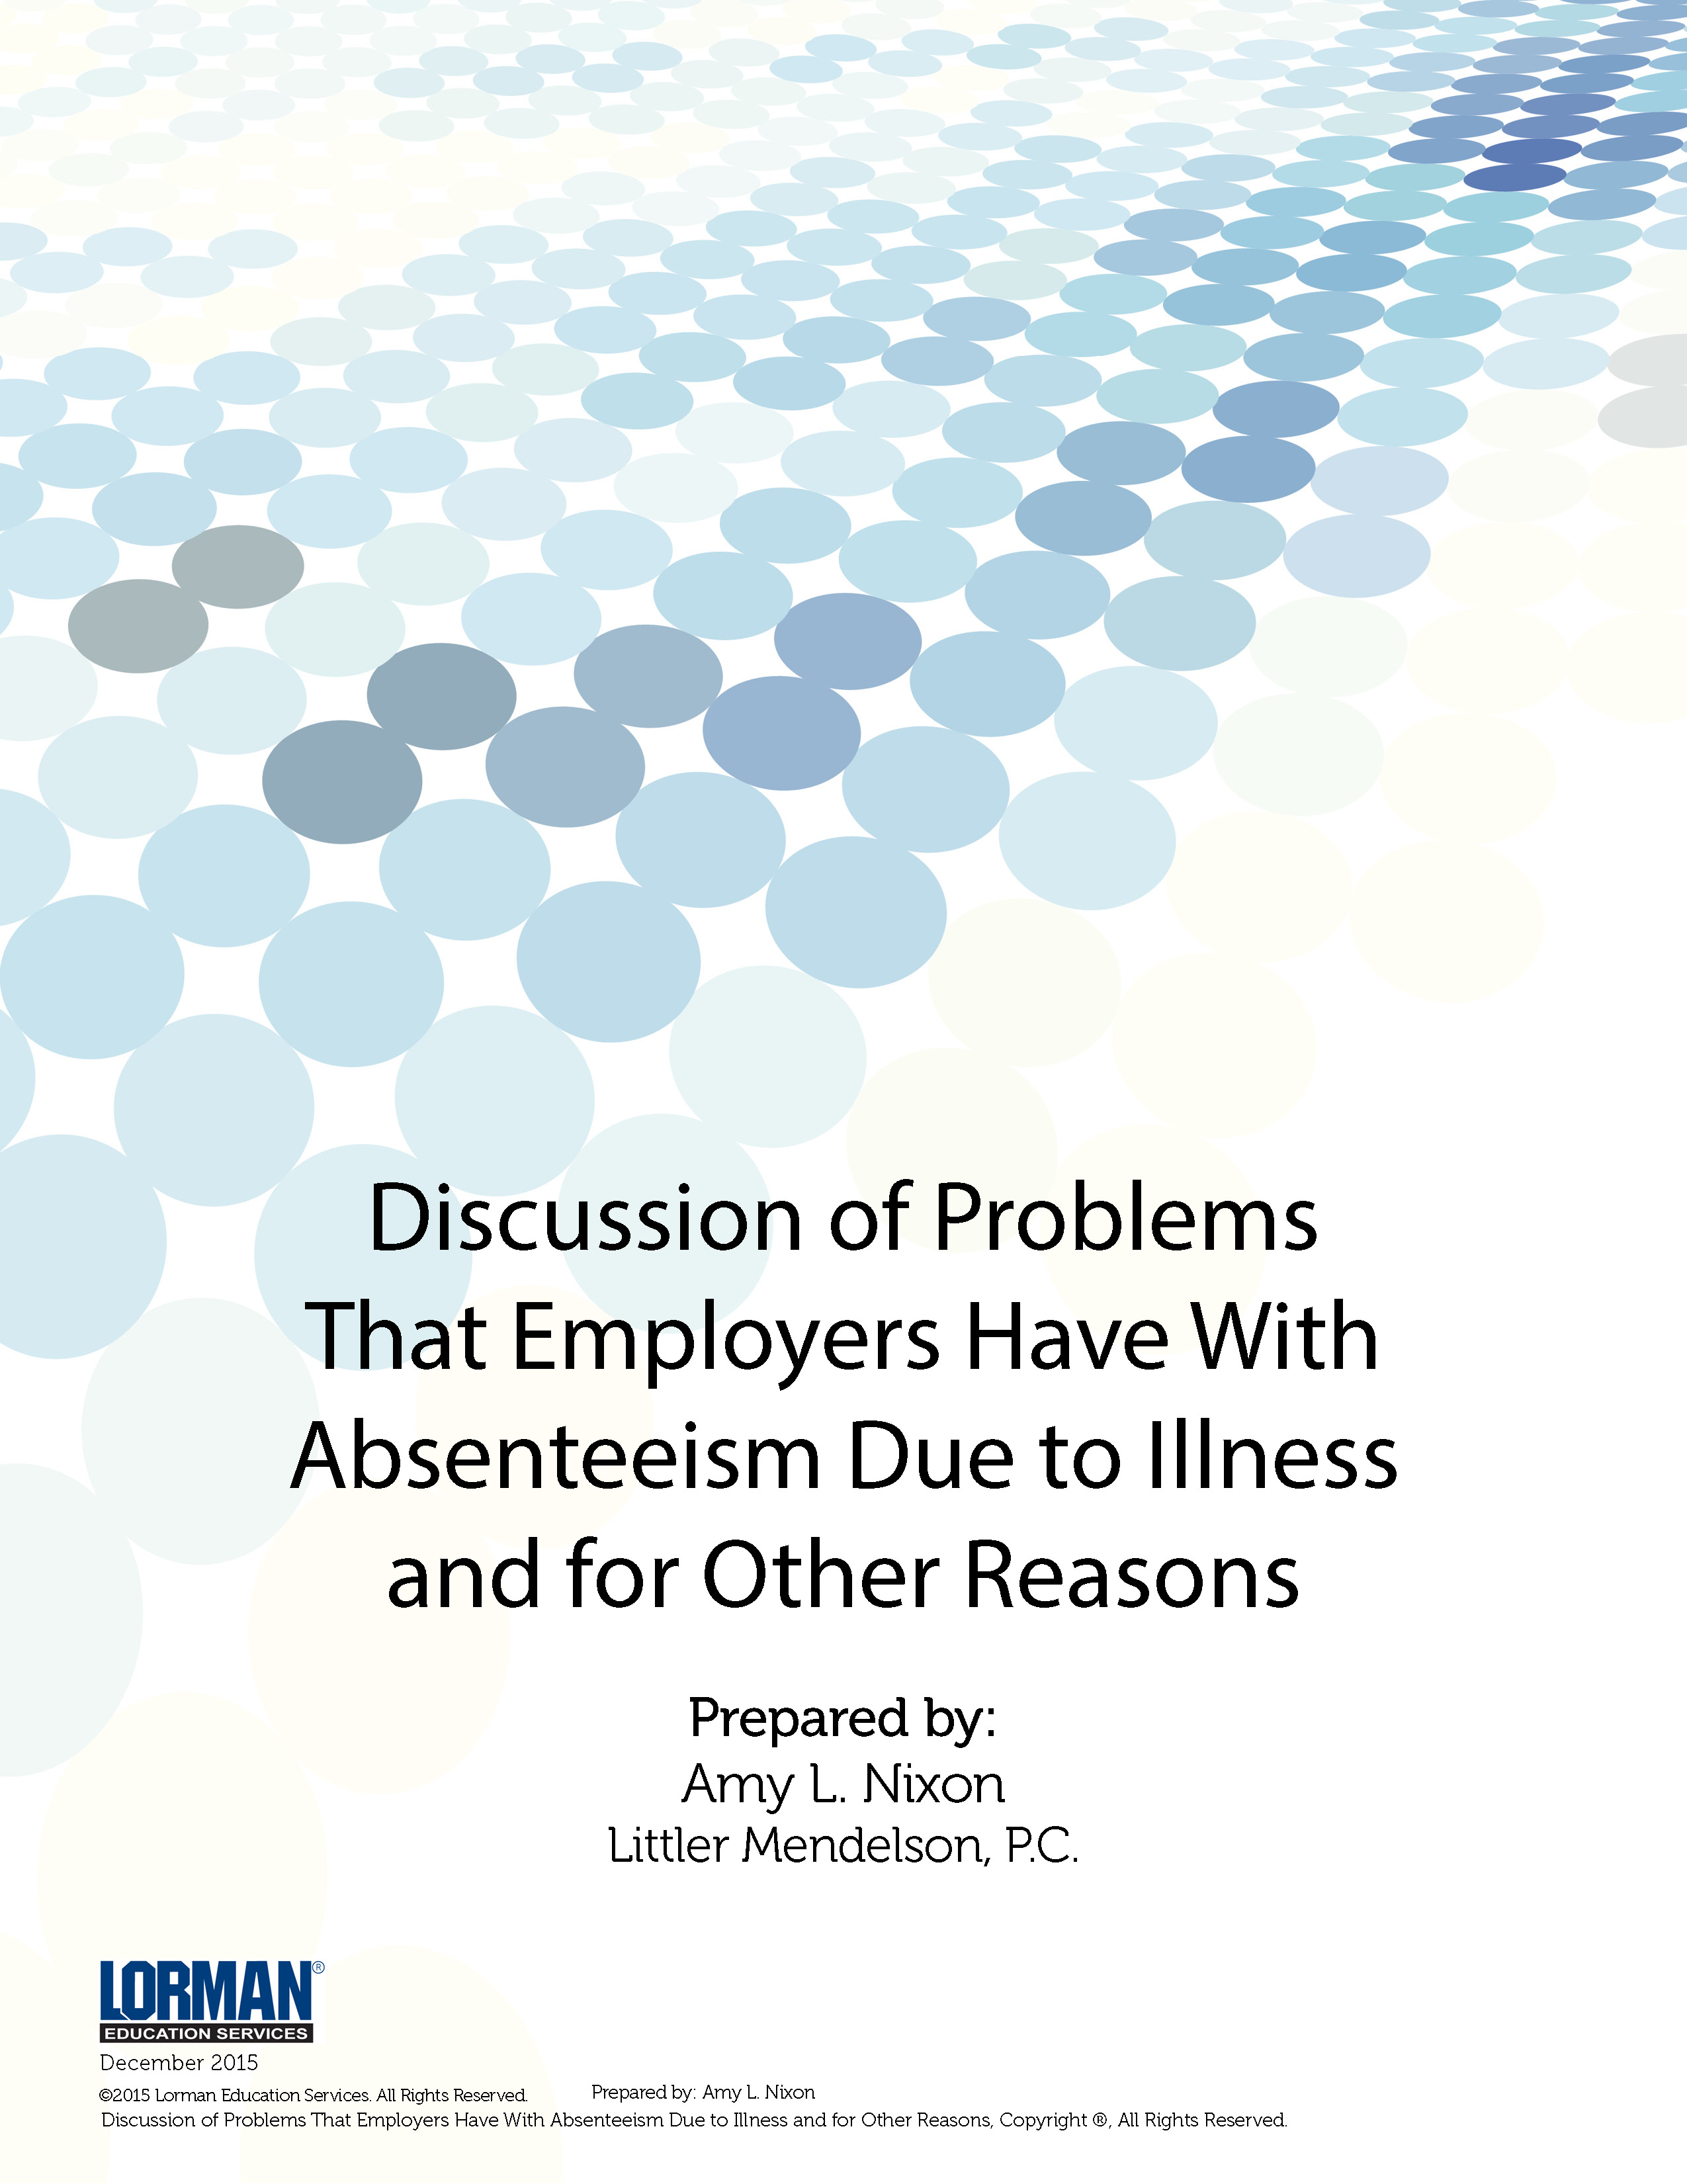 Discussion of Problems That Employers Have With Absenteeism Due to Illness and for Other Reasons